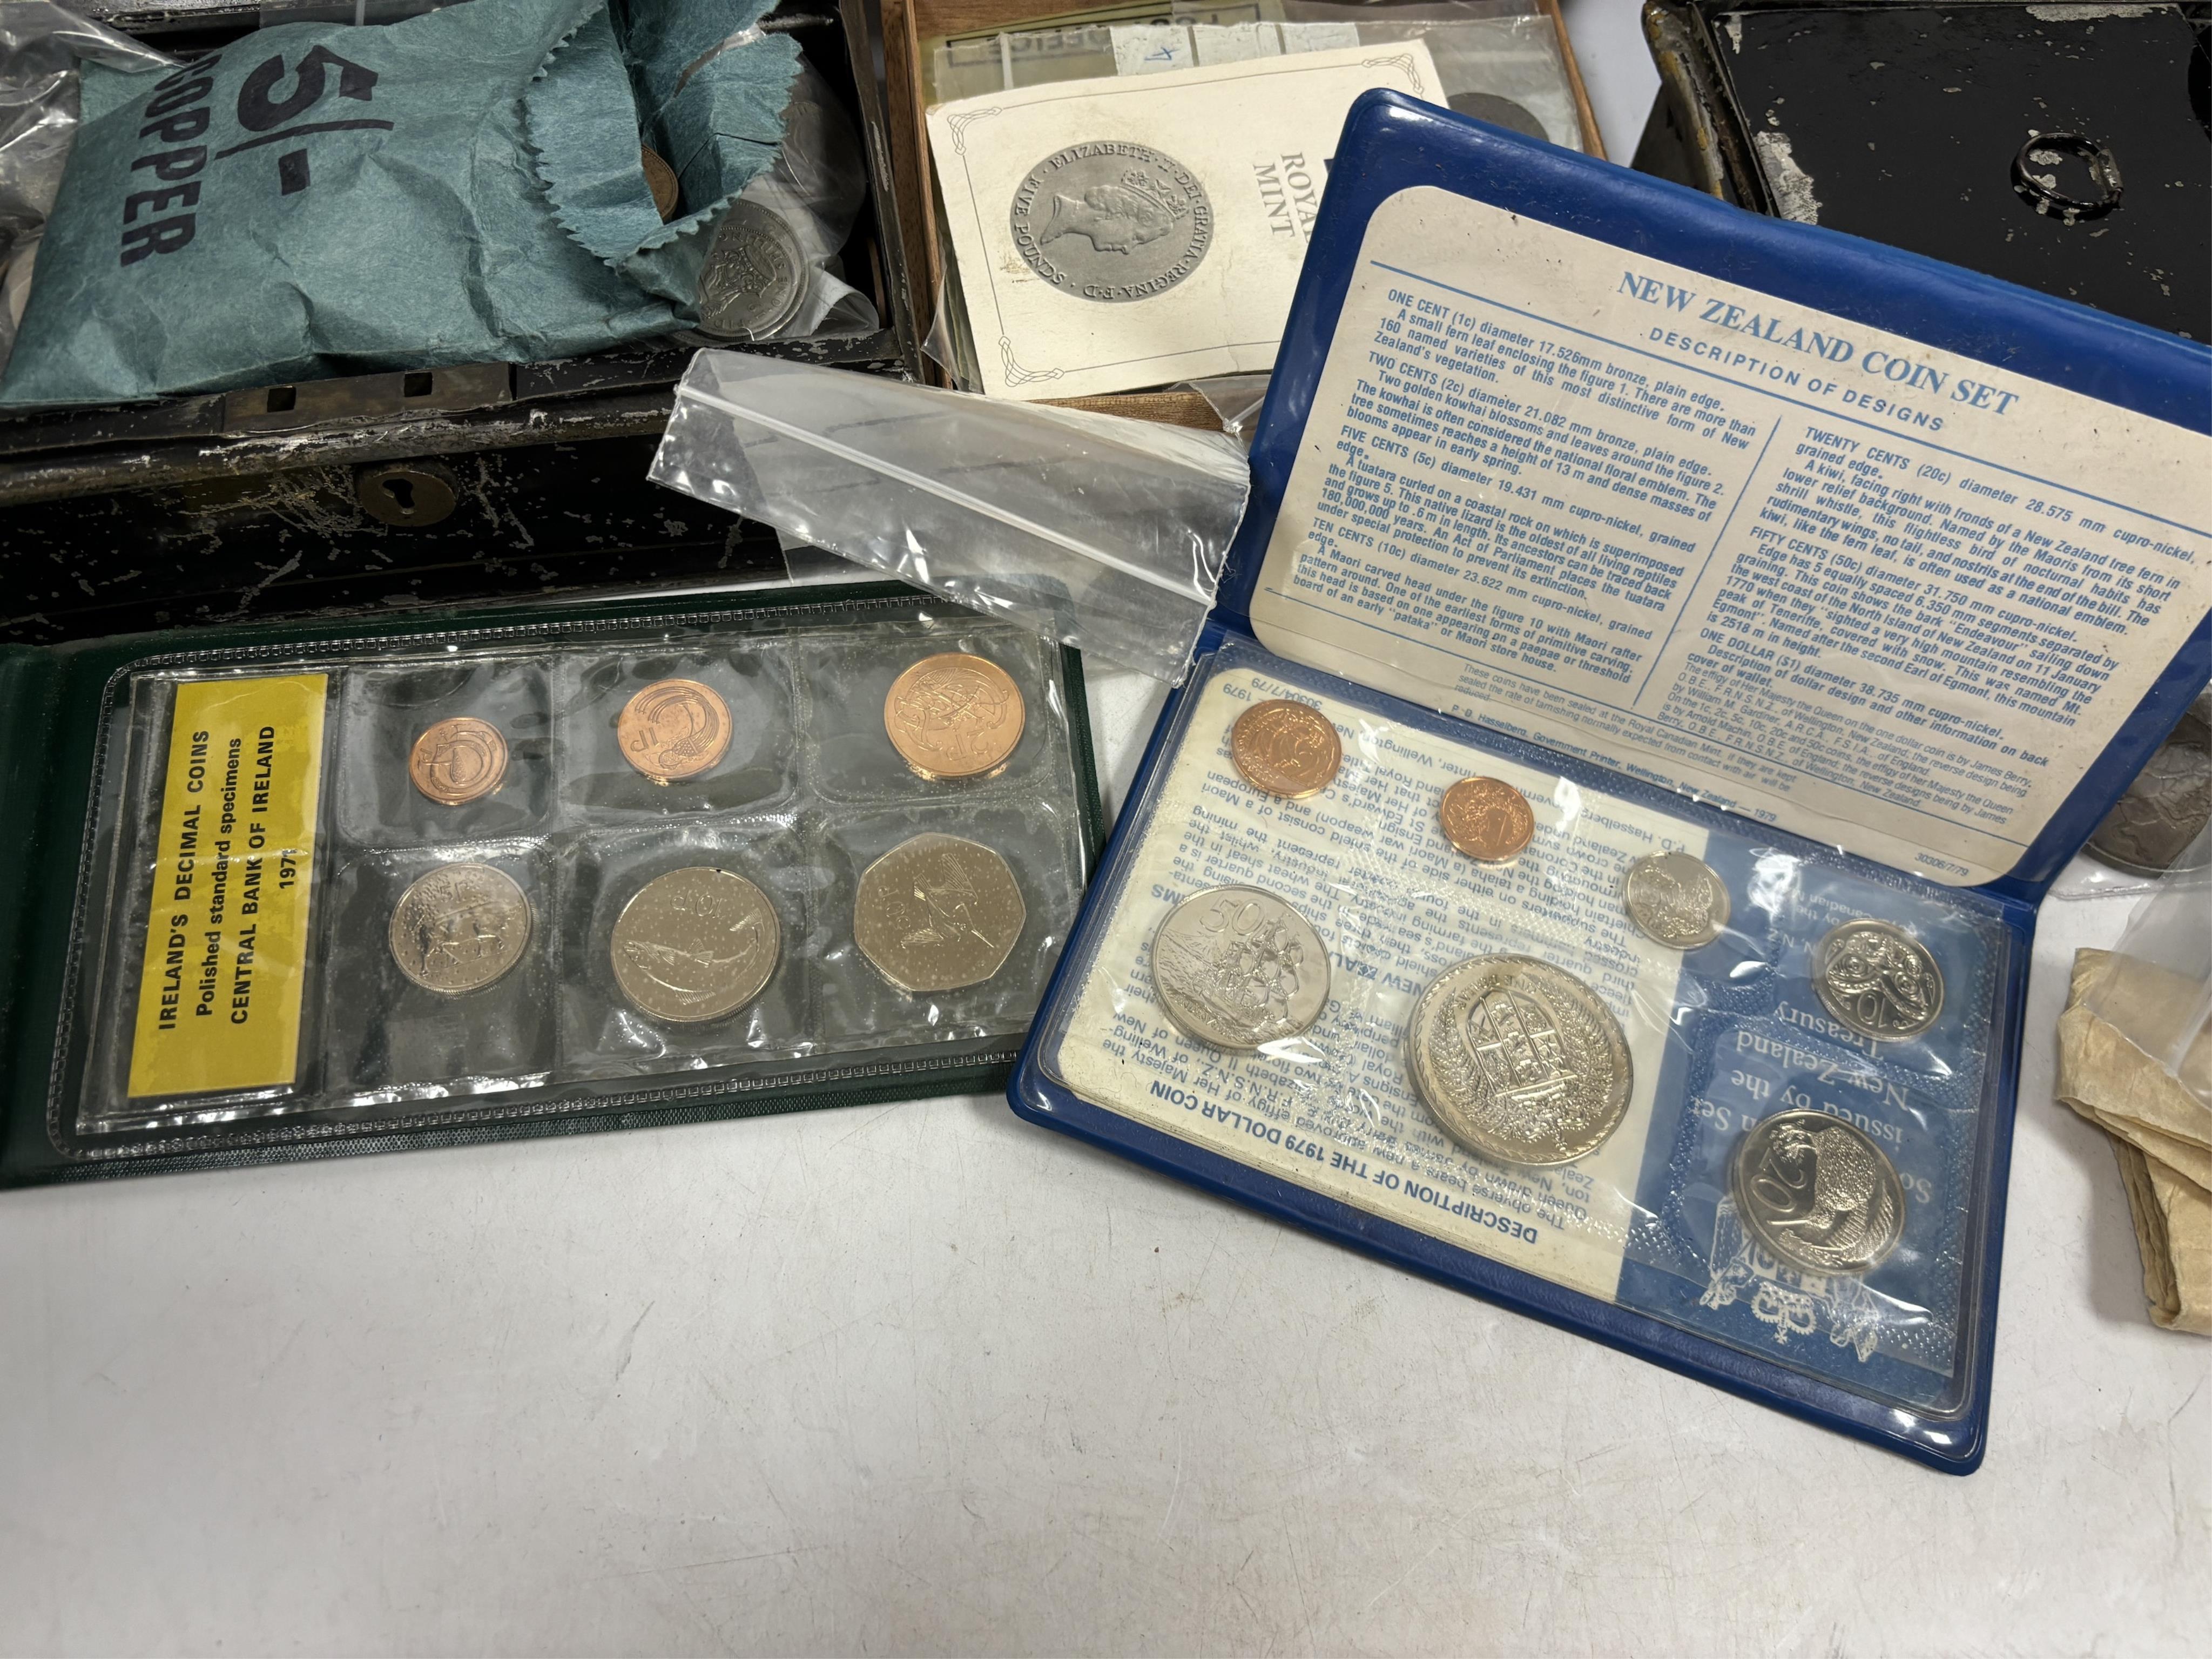 Mostly British coins, 19th/20th century to include two Victoria double florins 1889, good VF, two - Image 2 of 5